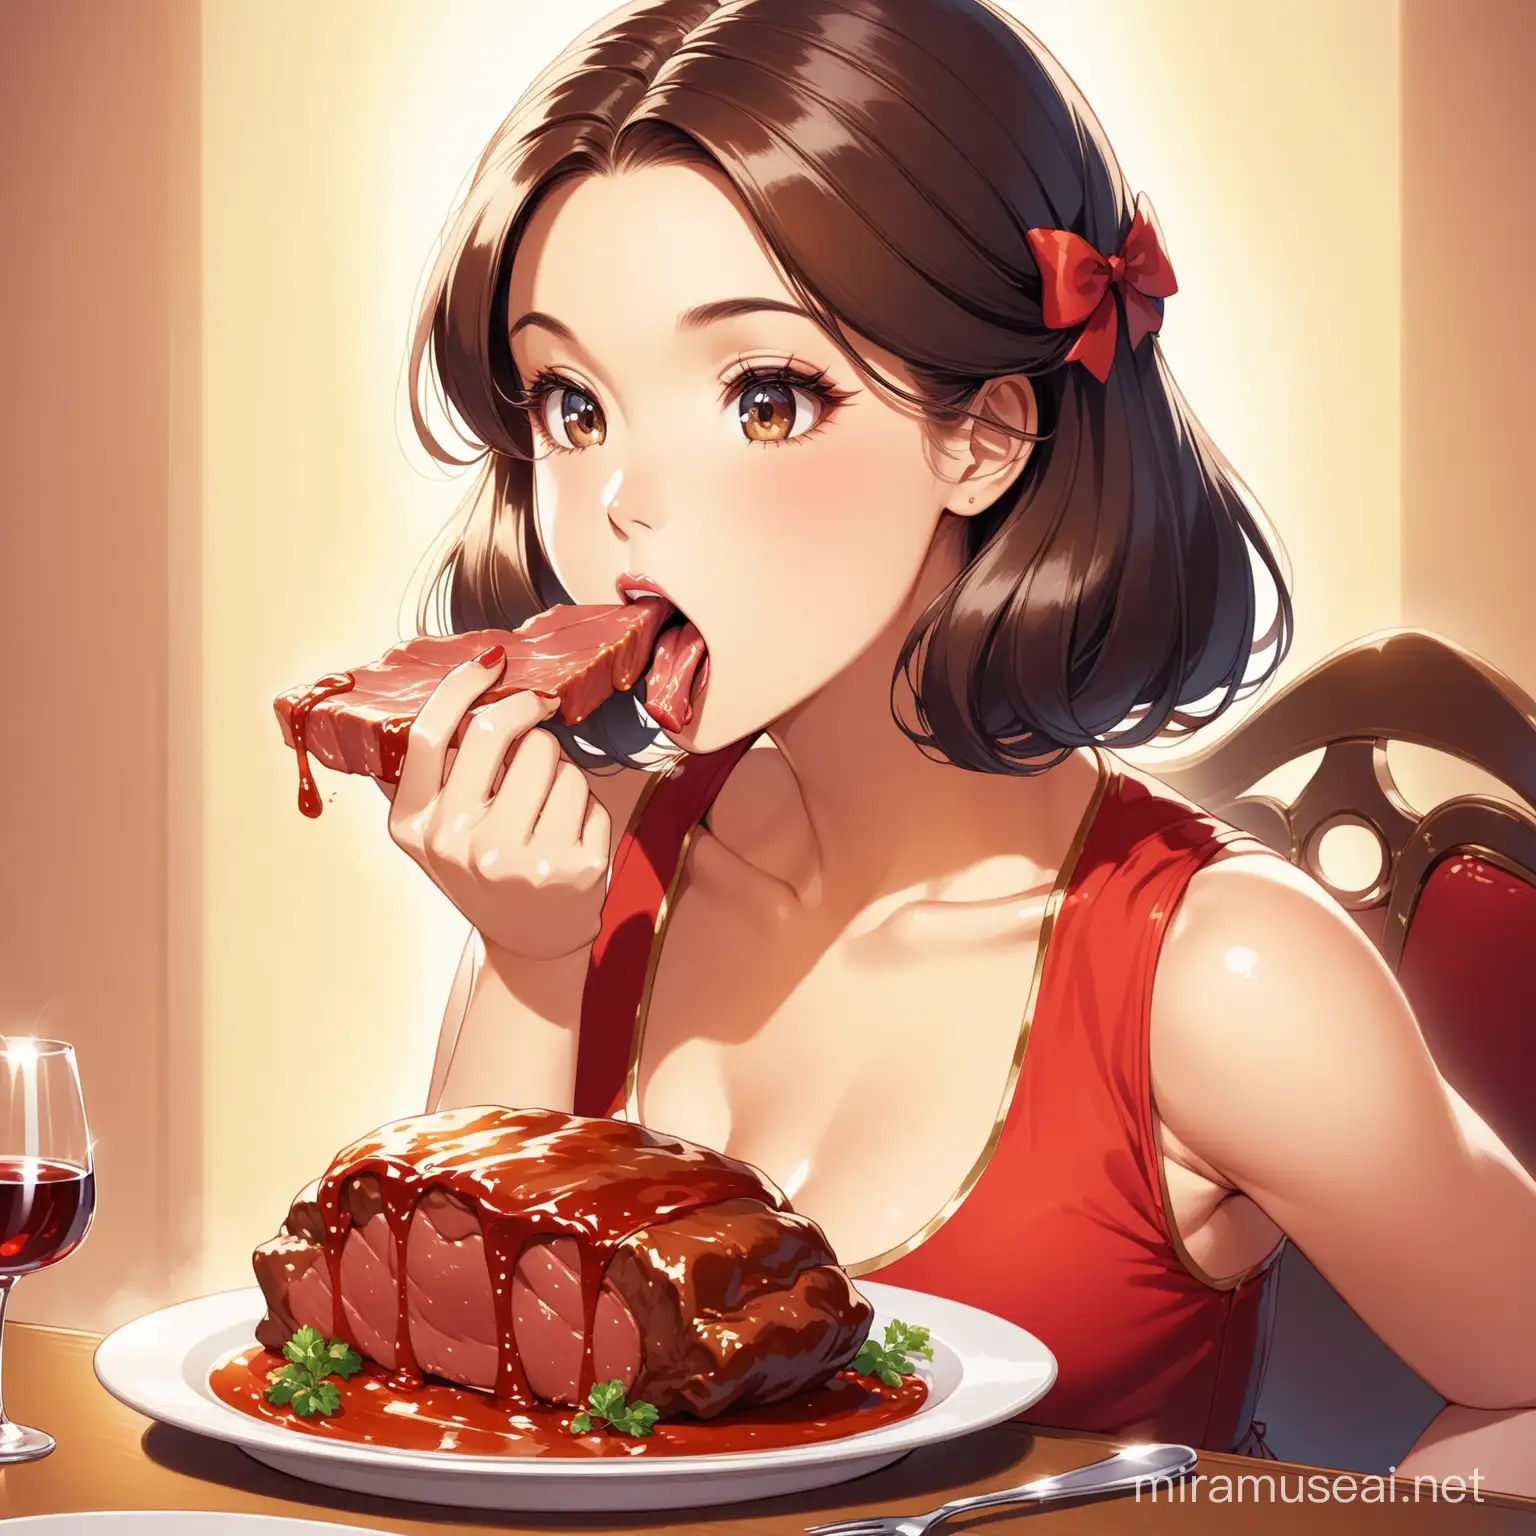 A classic lady eating meat